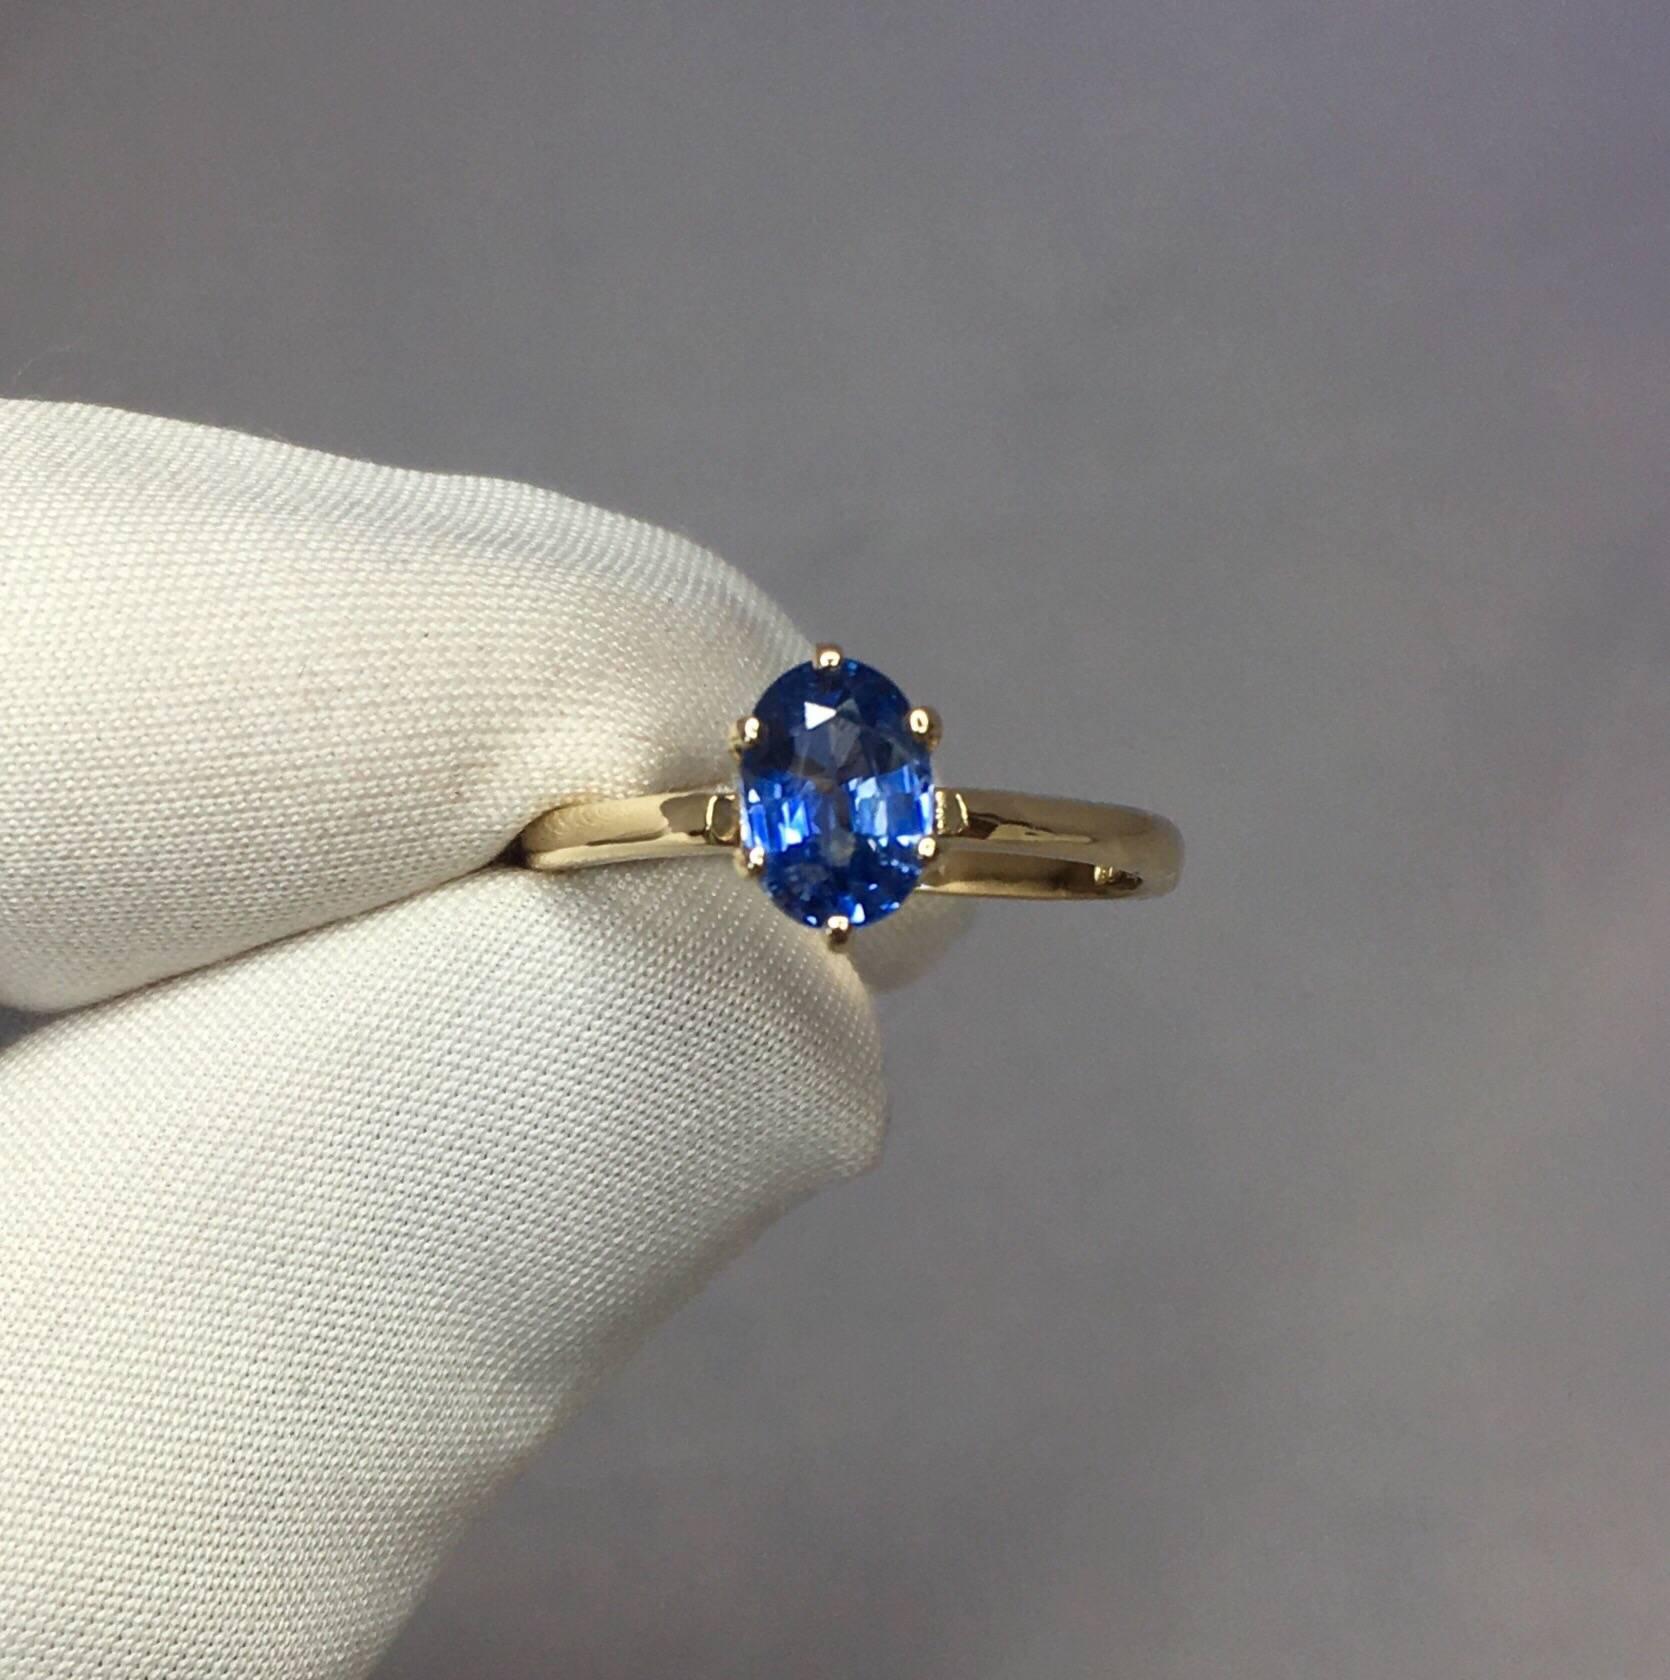 Stunning natural vivid blue ceylon sapphire set in a beautiful 14k yellow gold 6 prong solitaire ring. 

1.07 carat stone with a stunning blue colour and very good clarity.
Also has an excellent oval cut which shows lots of sparkle and light